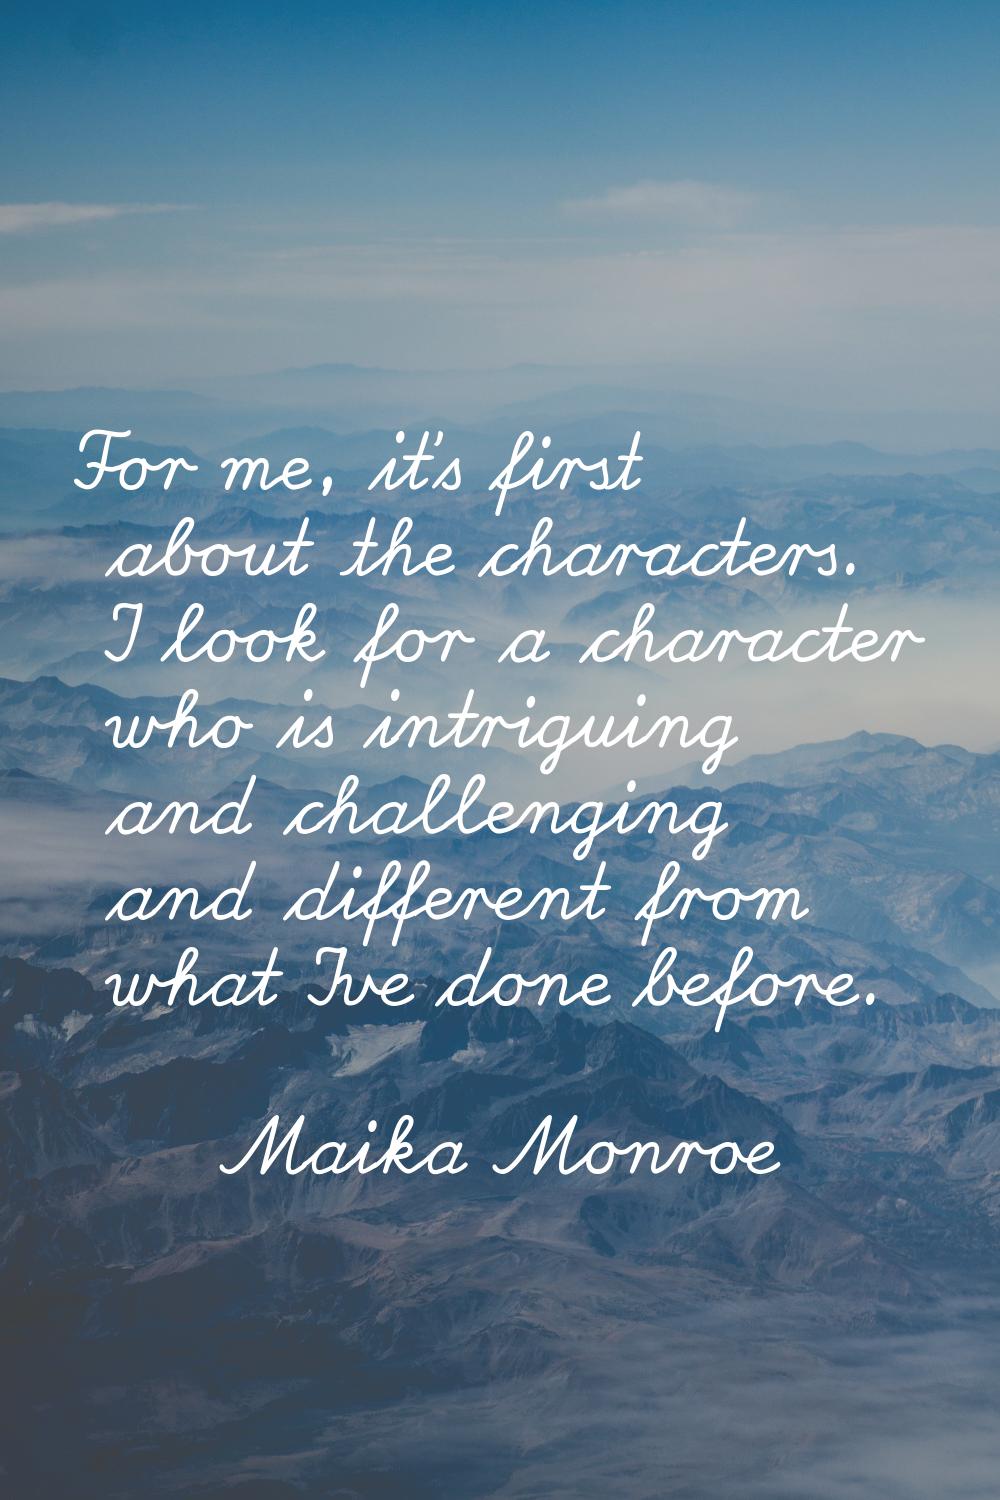 For me, it's first about the characters. I look for a character who is intriguing and challenging a